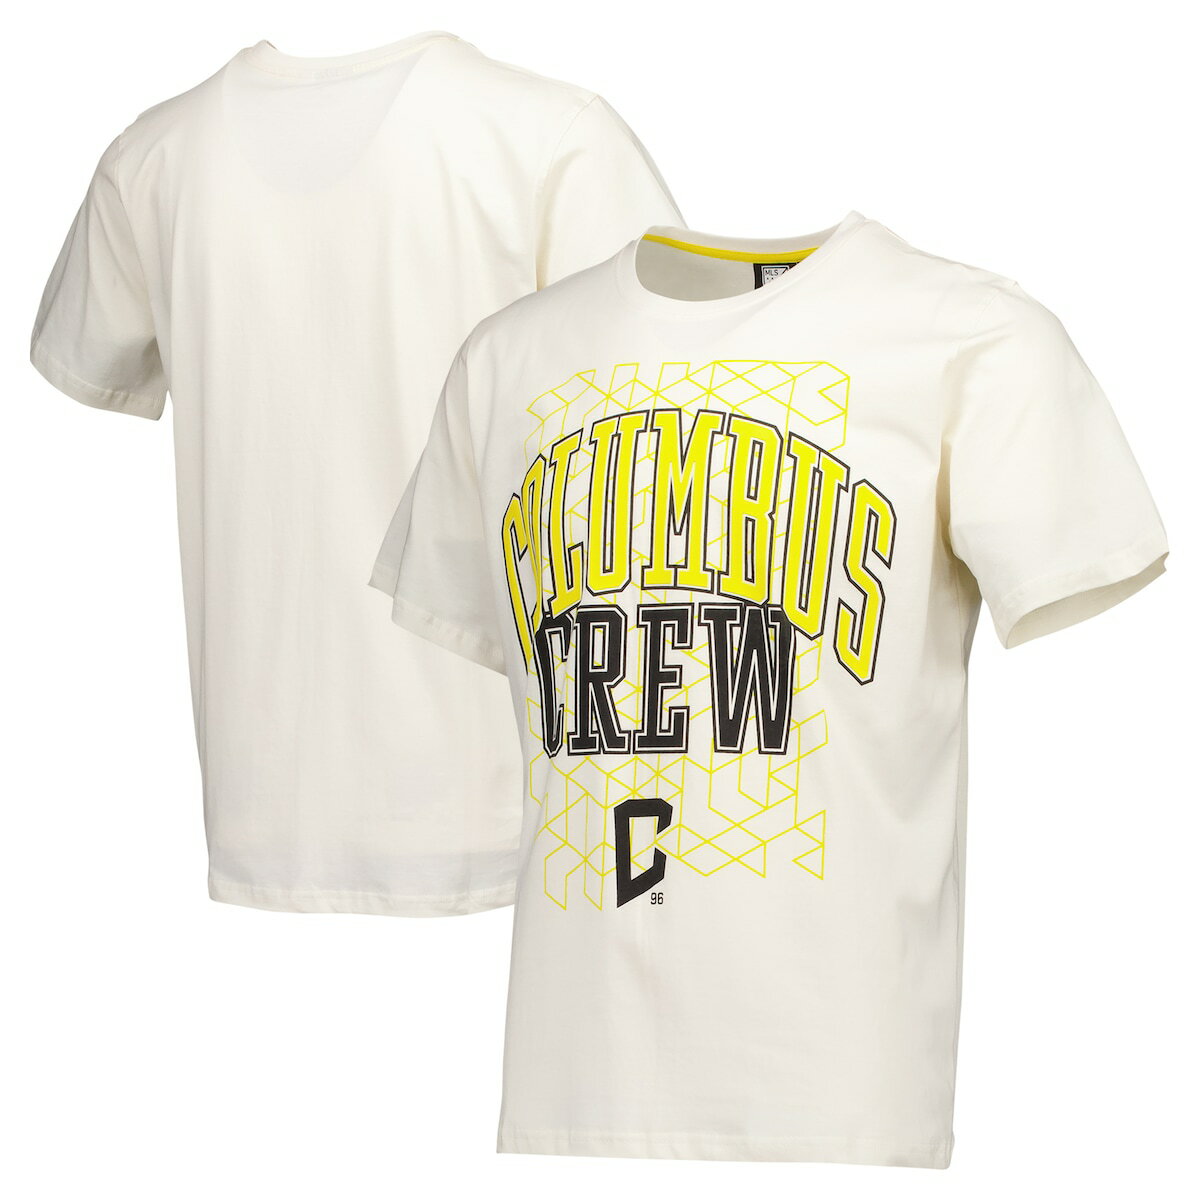 Bring some larger-than-life club spirit straight from the '90s by gearing up for match day in this Columbus Crew Heavy Relaxed T-shirt. It features a sizable Columbus Crew graphic along with a tasteful pattern that spans the whole torso. This tee's relaxed fit ensures it rests comfortably when you reach for it, so you can keep calm and focus on cheering your Columbus Crew all the way to victory in throwback style.Heavyweight fabricShort sleeveOfficially licensedImportedMachine wash, line dryScreen print graphicsRelaxed fitCrew neckBrand: Sport Design SwedenMaterial: 100% CottonHeat-sealed rubberized graphic